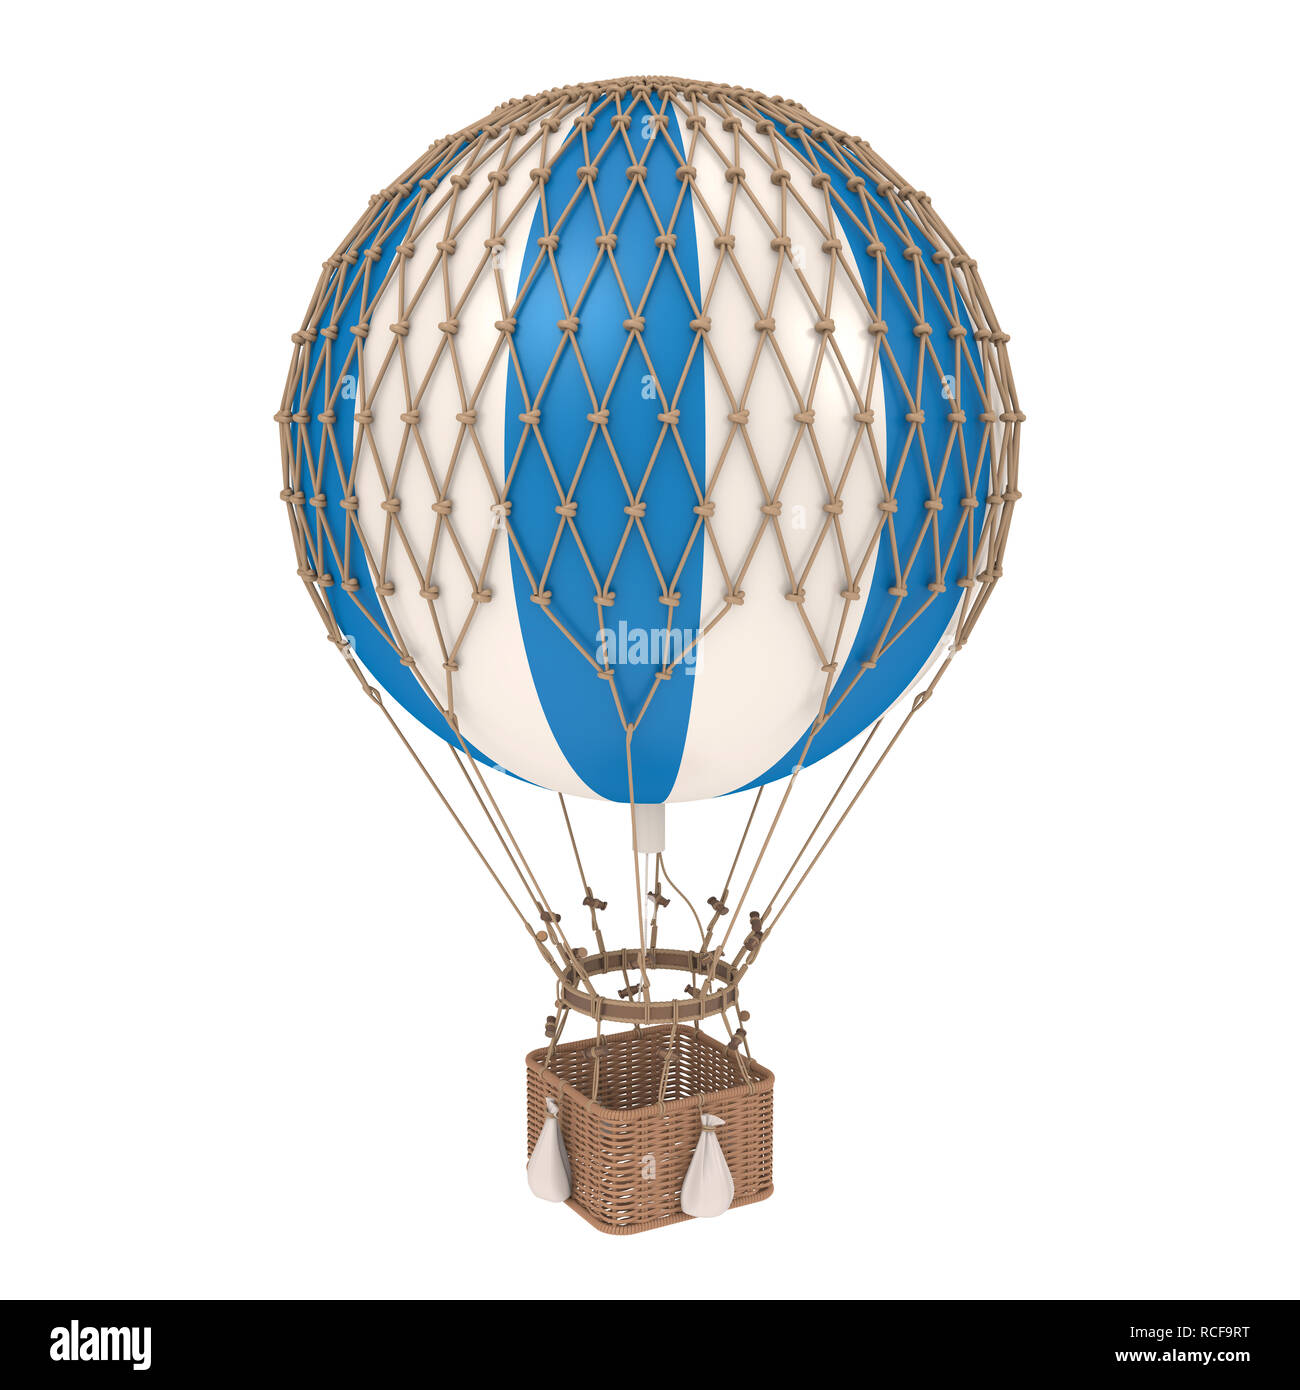 Vintage Hot Air Balloon Isolated Stock Photo - Alamy